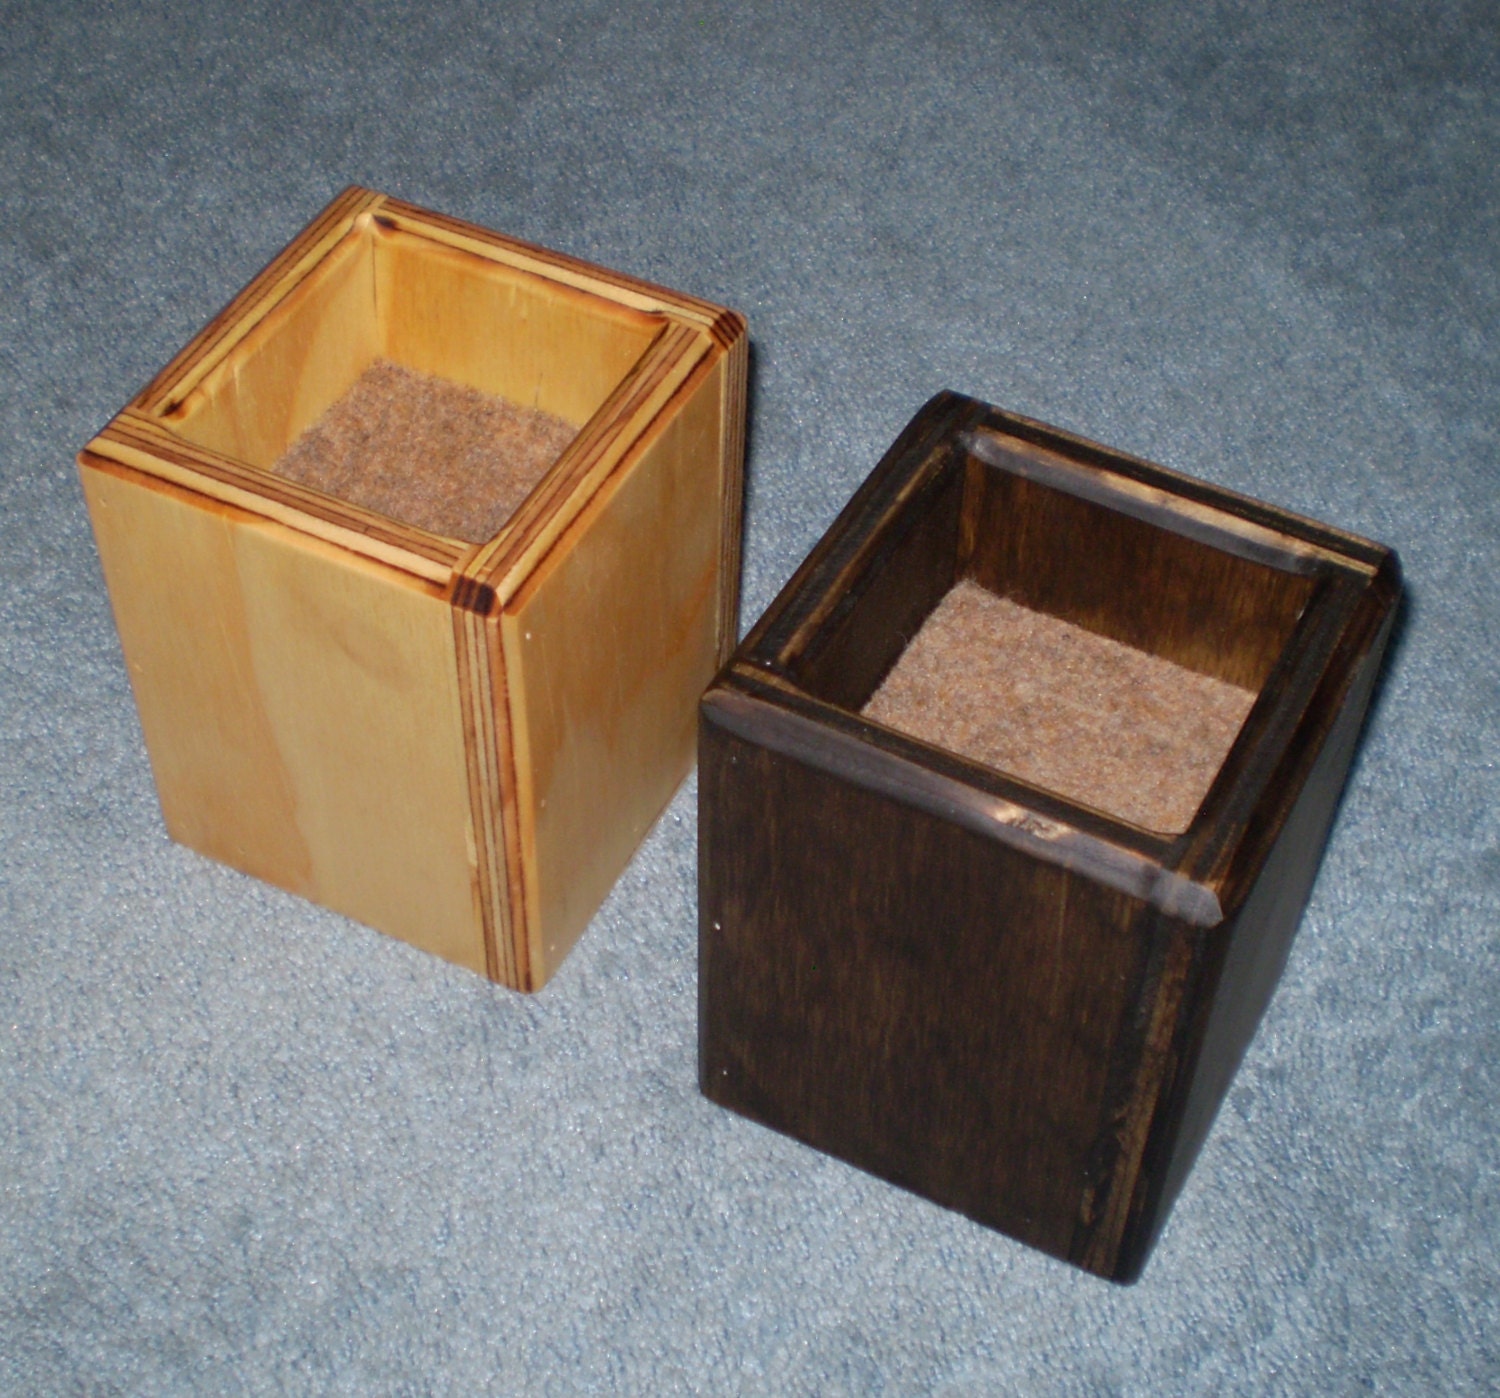 Furniture Risers 4 Inch All Wood Construction Stained